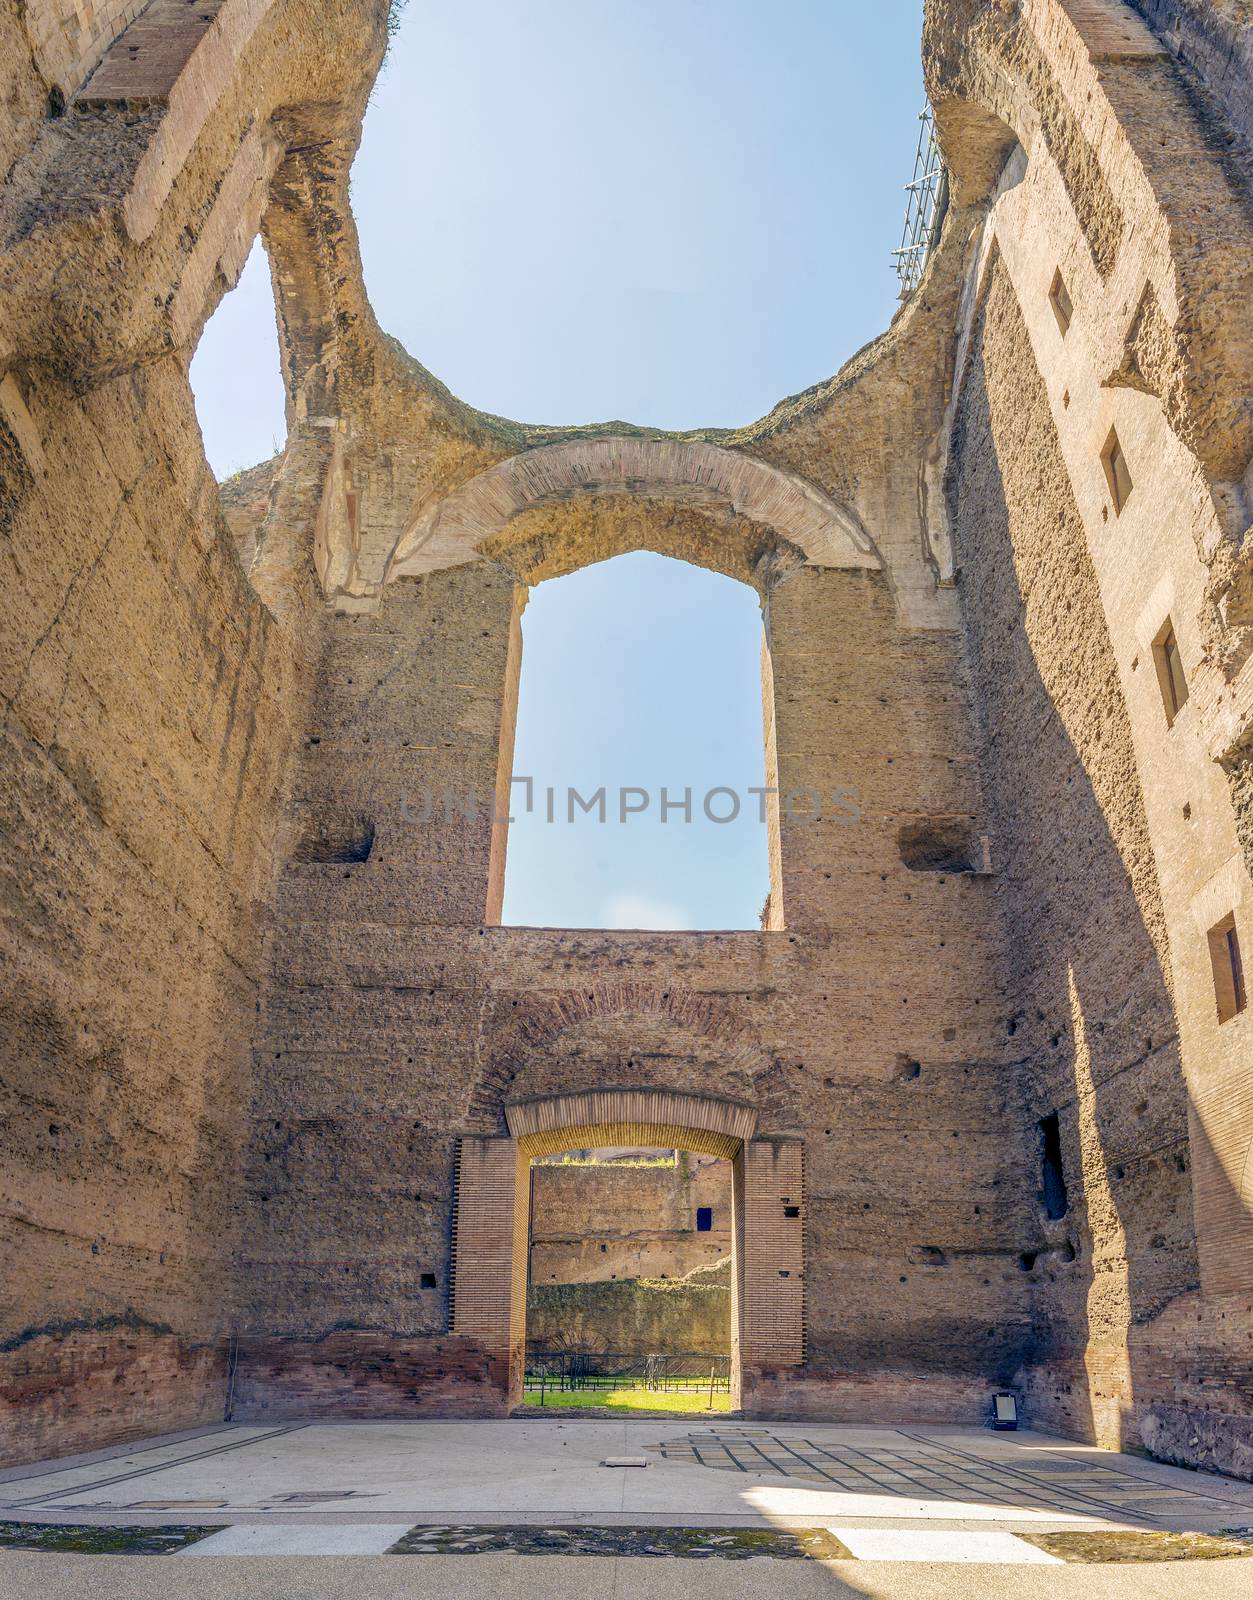 Baths of Caracalla, ancient ruins of roman public thermae built by Emperor Caracalla in Rome, Italy